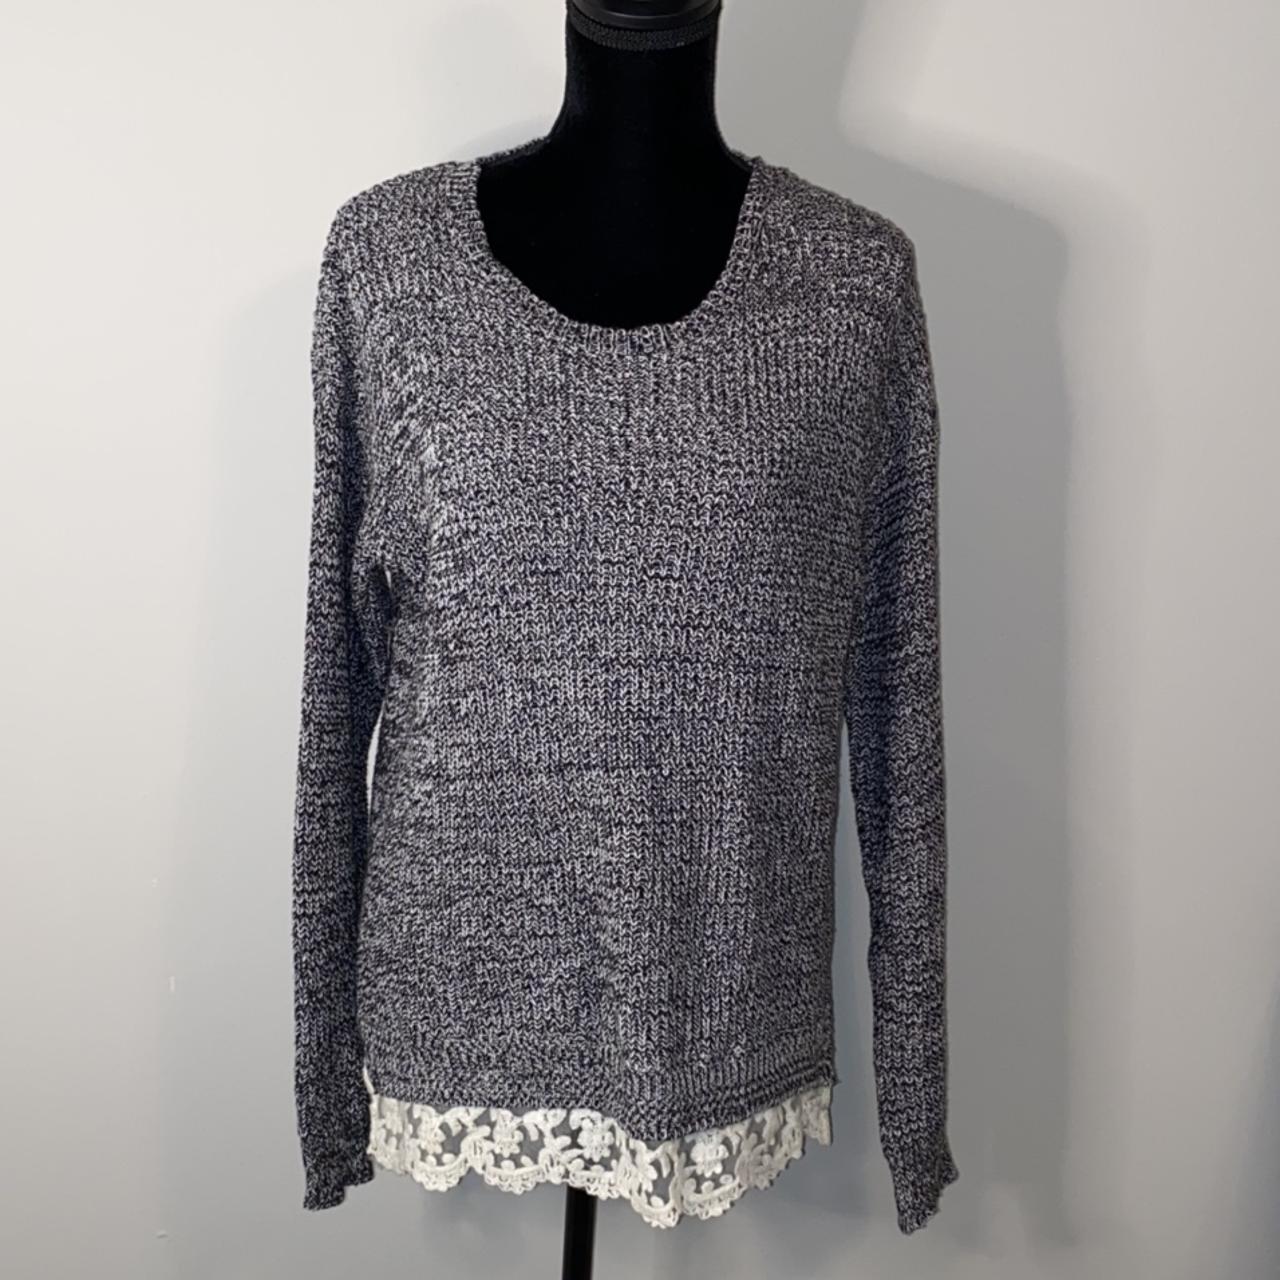 Forever 21 Women's Black and Grey Jumper